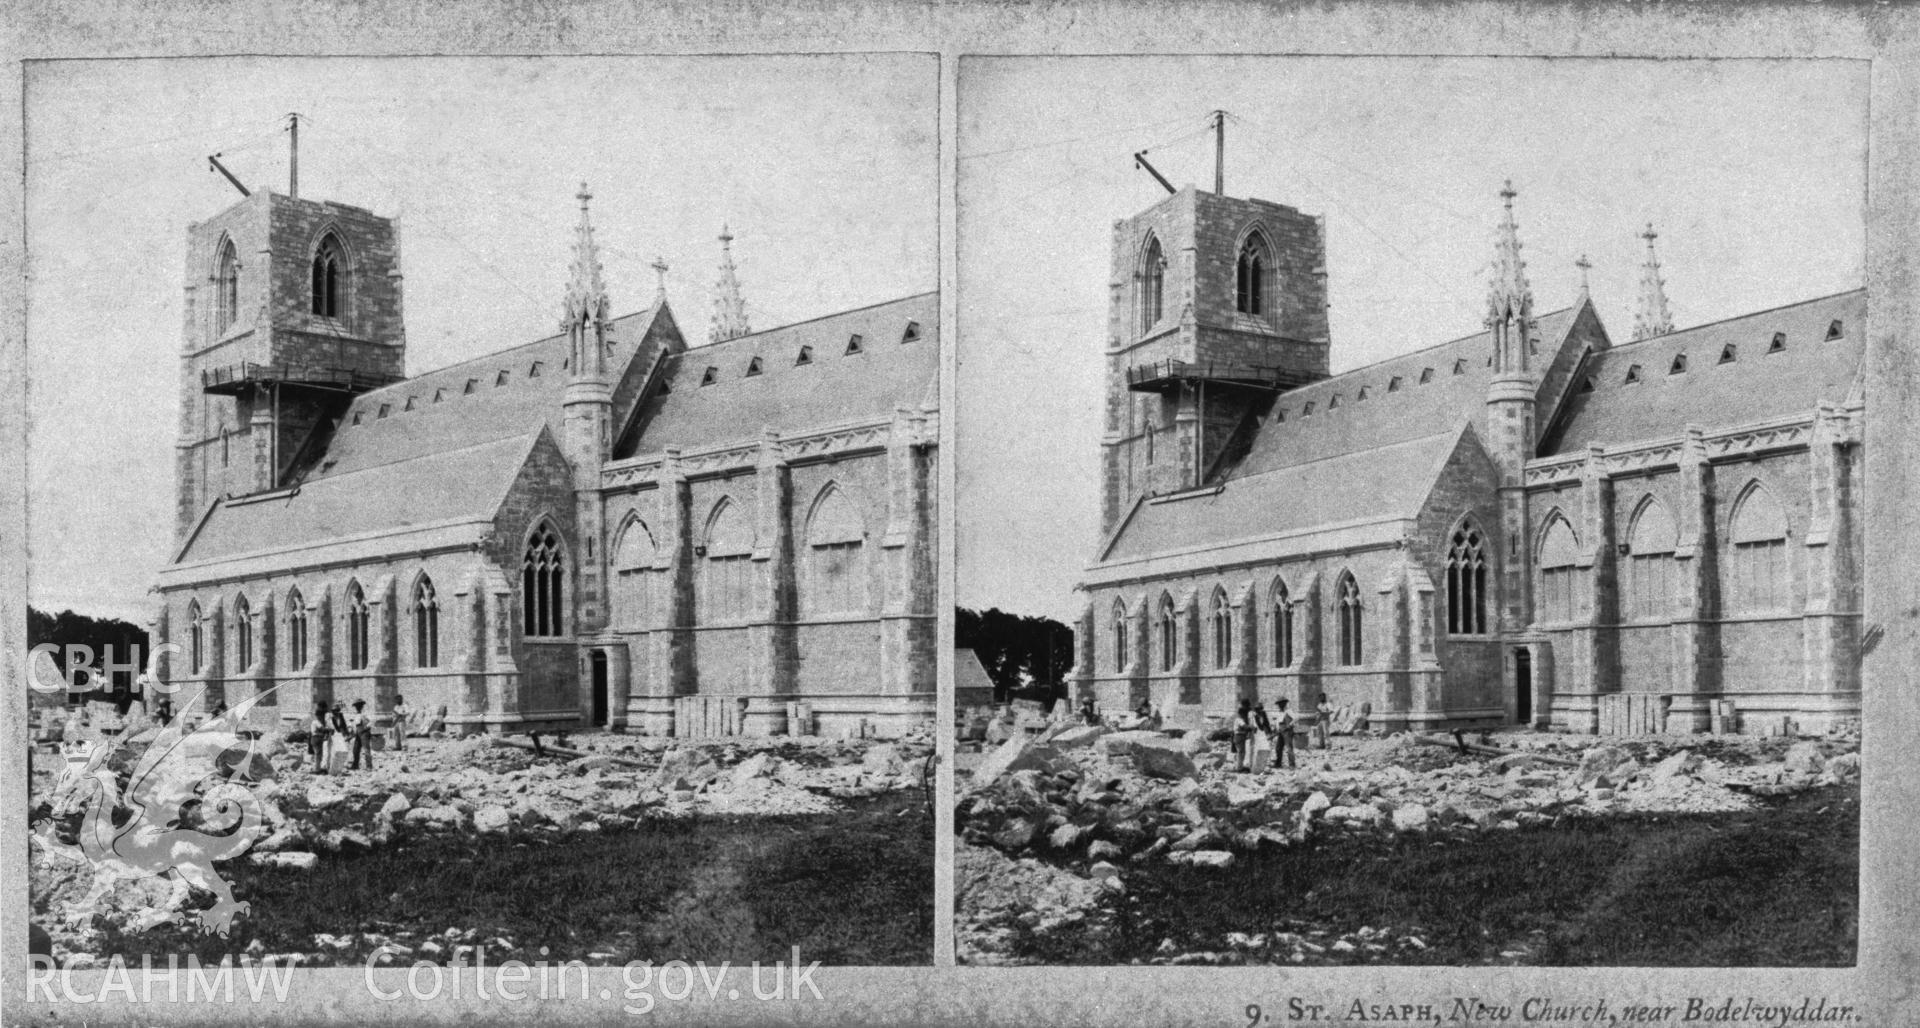 Black and white photograph showing St Margaret's Church, Bodelwyddan, under constuction, copied from an original stereoscopic print in the possession of Thomas Lloyd. Negative held.